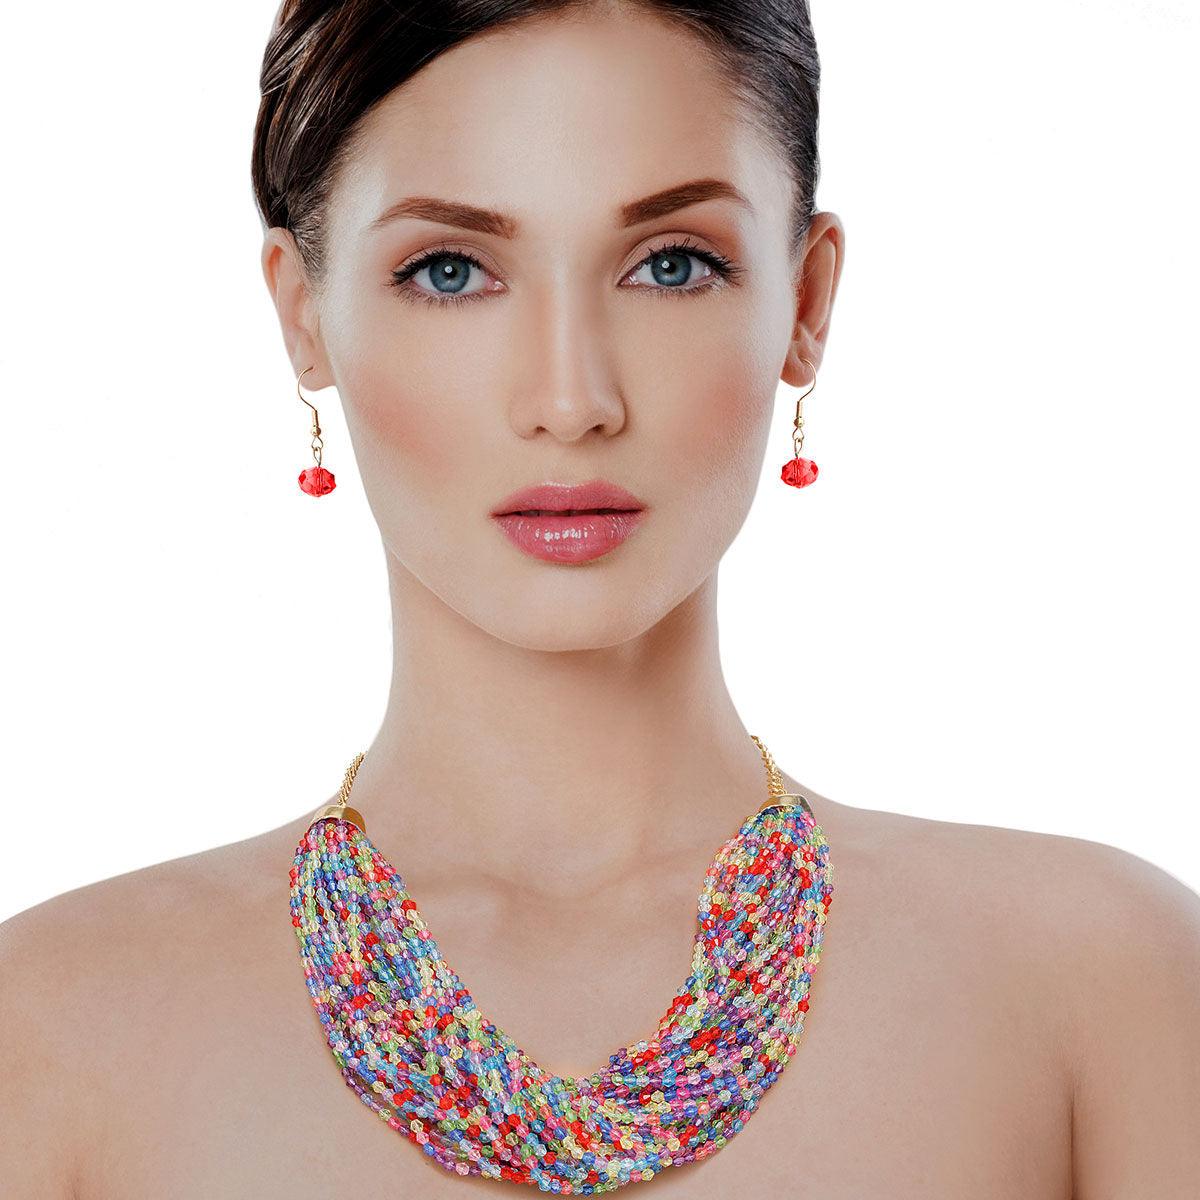 Multicolor Bead Multi Strand Necklace with Earrings